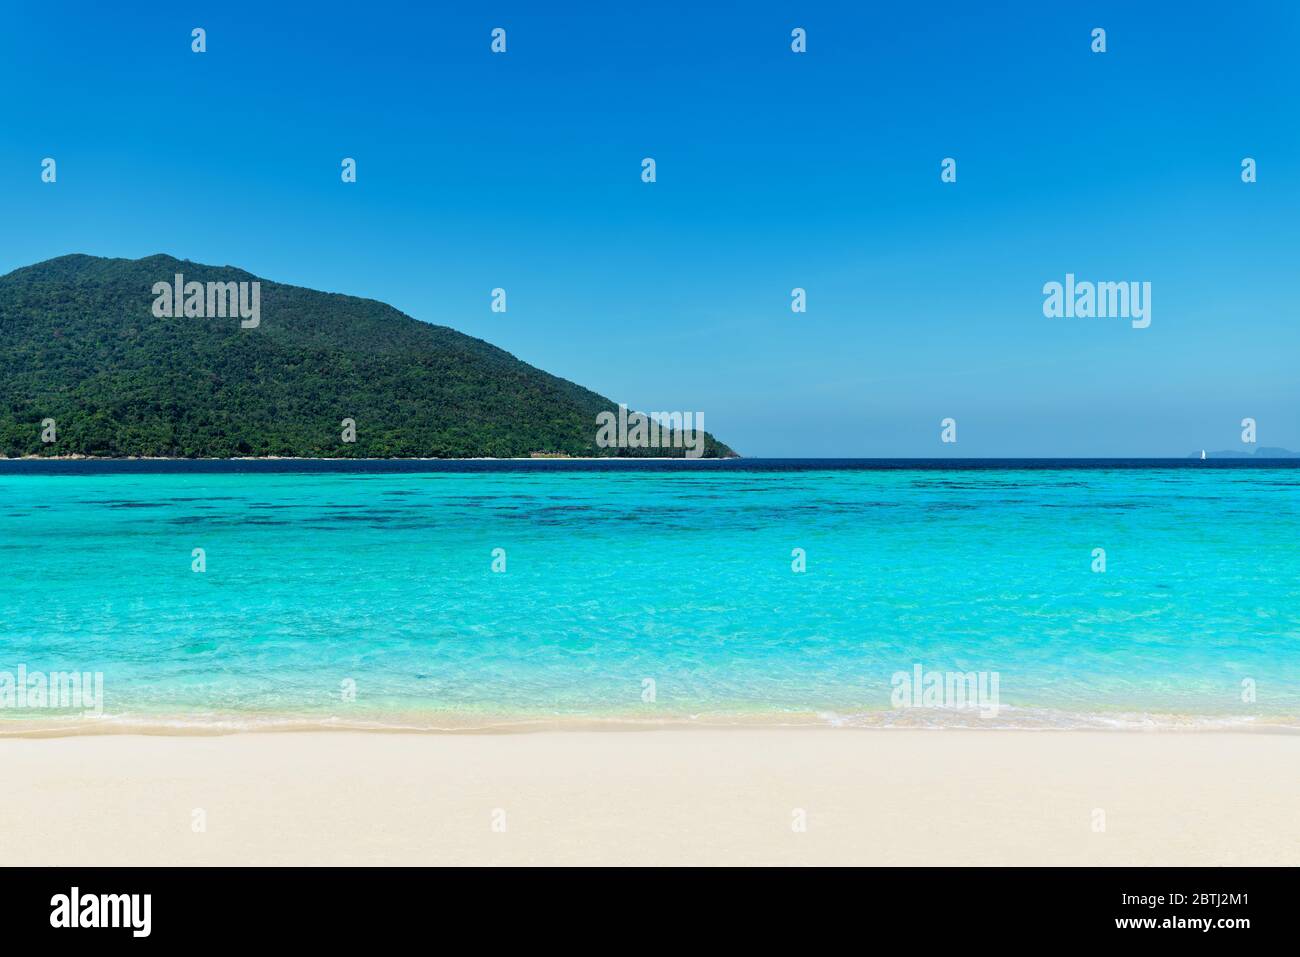 Turquoise clear sea and white sand beach on tropical island. Summer vacation, travel, nature background concept Stock Photo